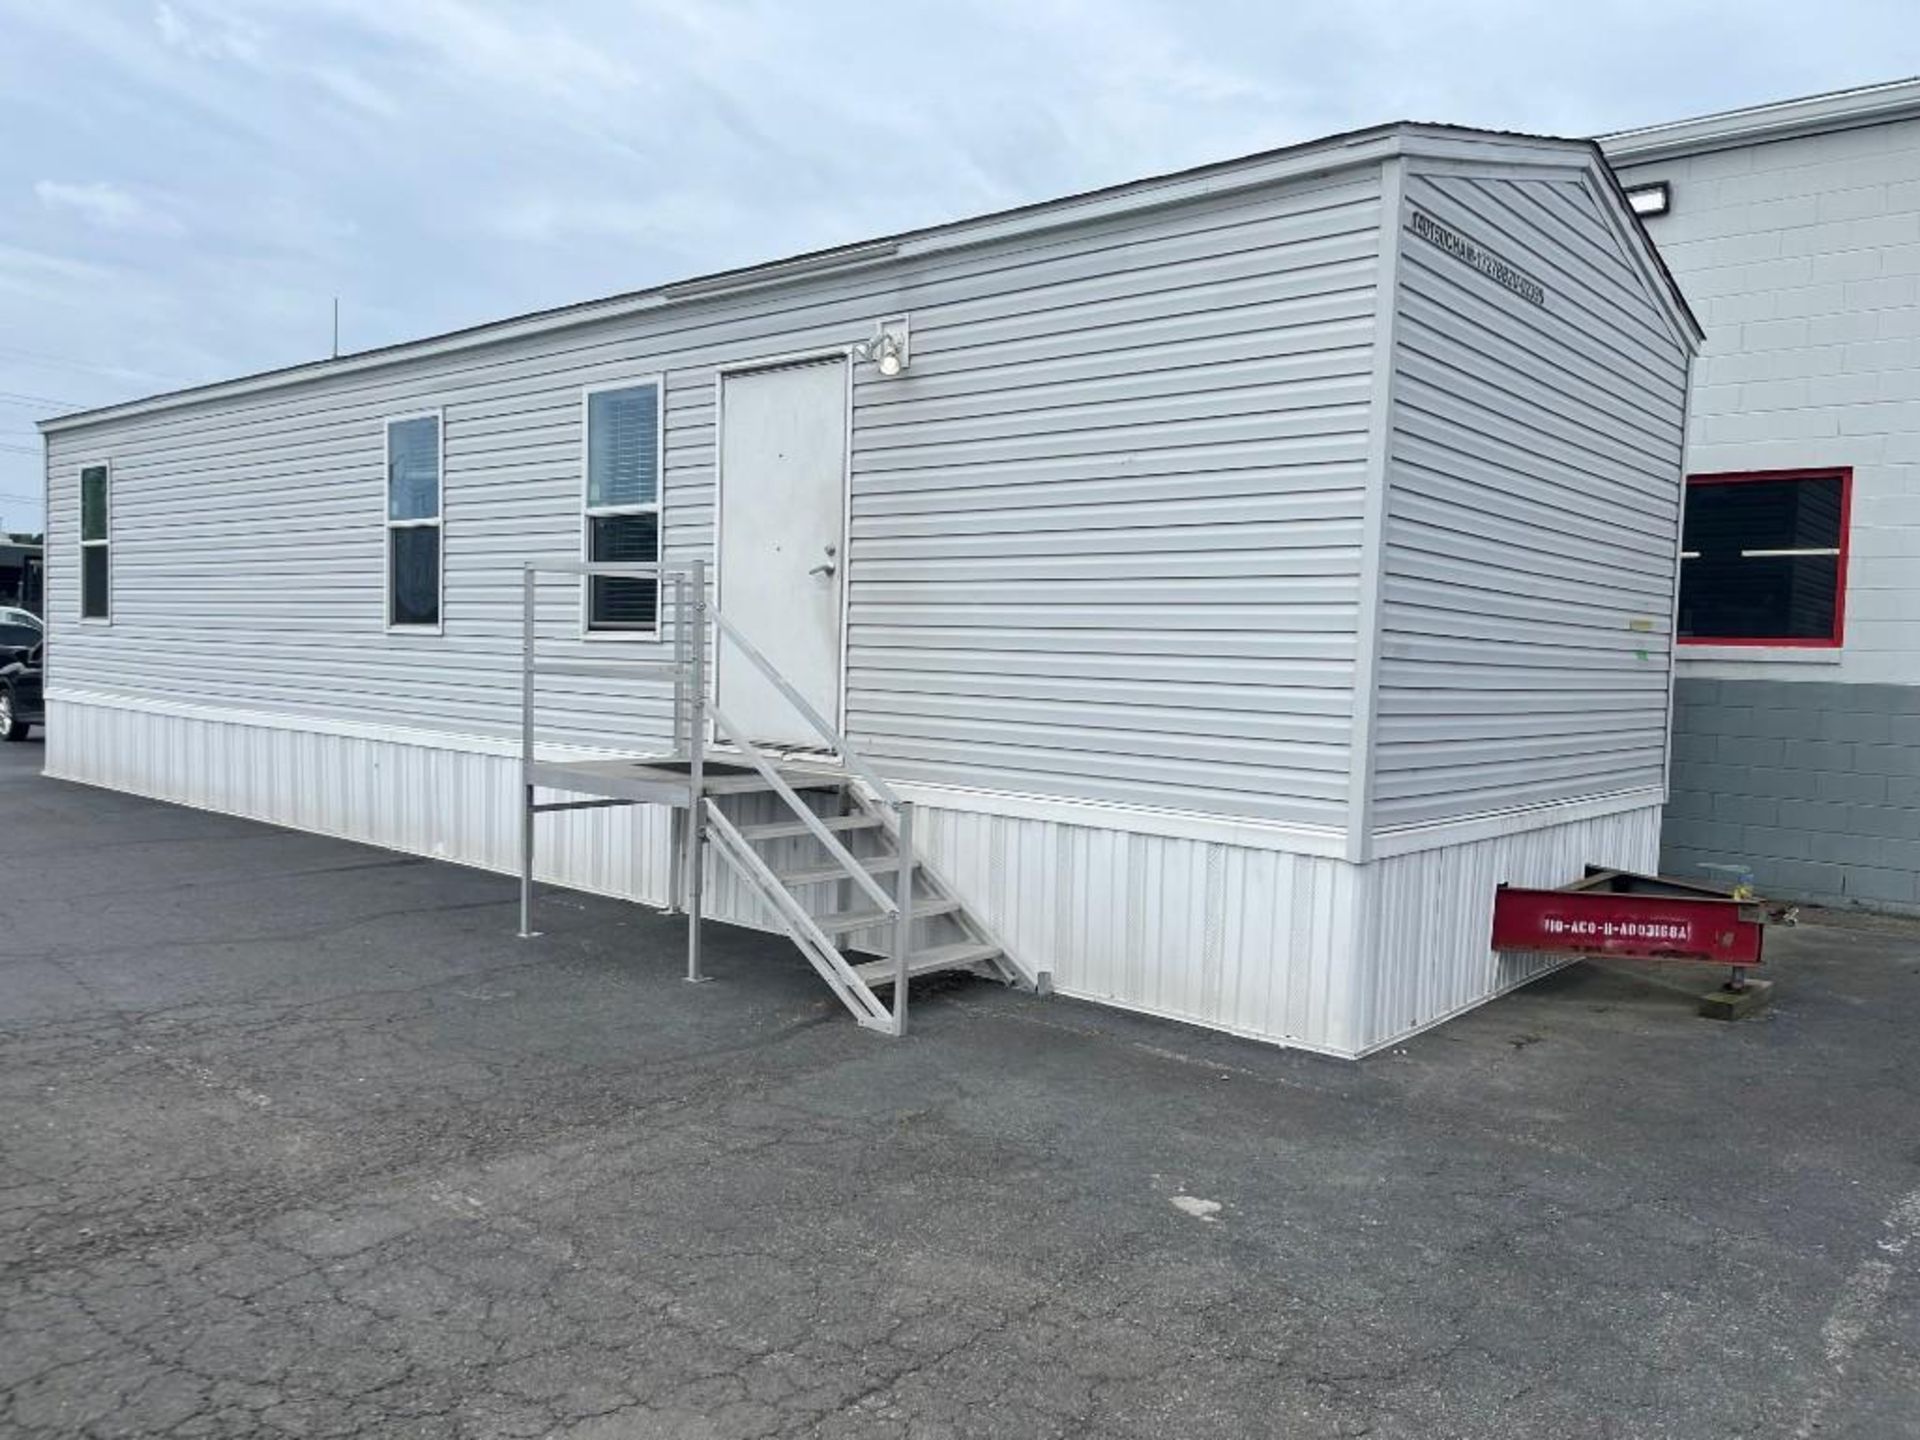 2018 Champion Home Builders Towable Mobile Home/Office